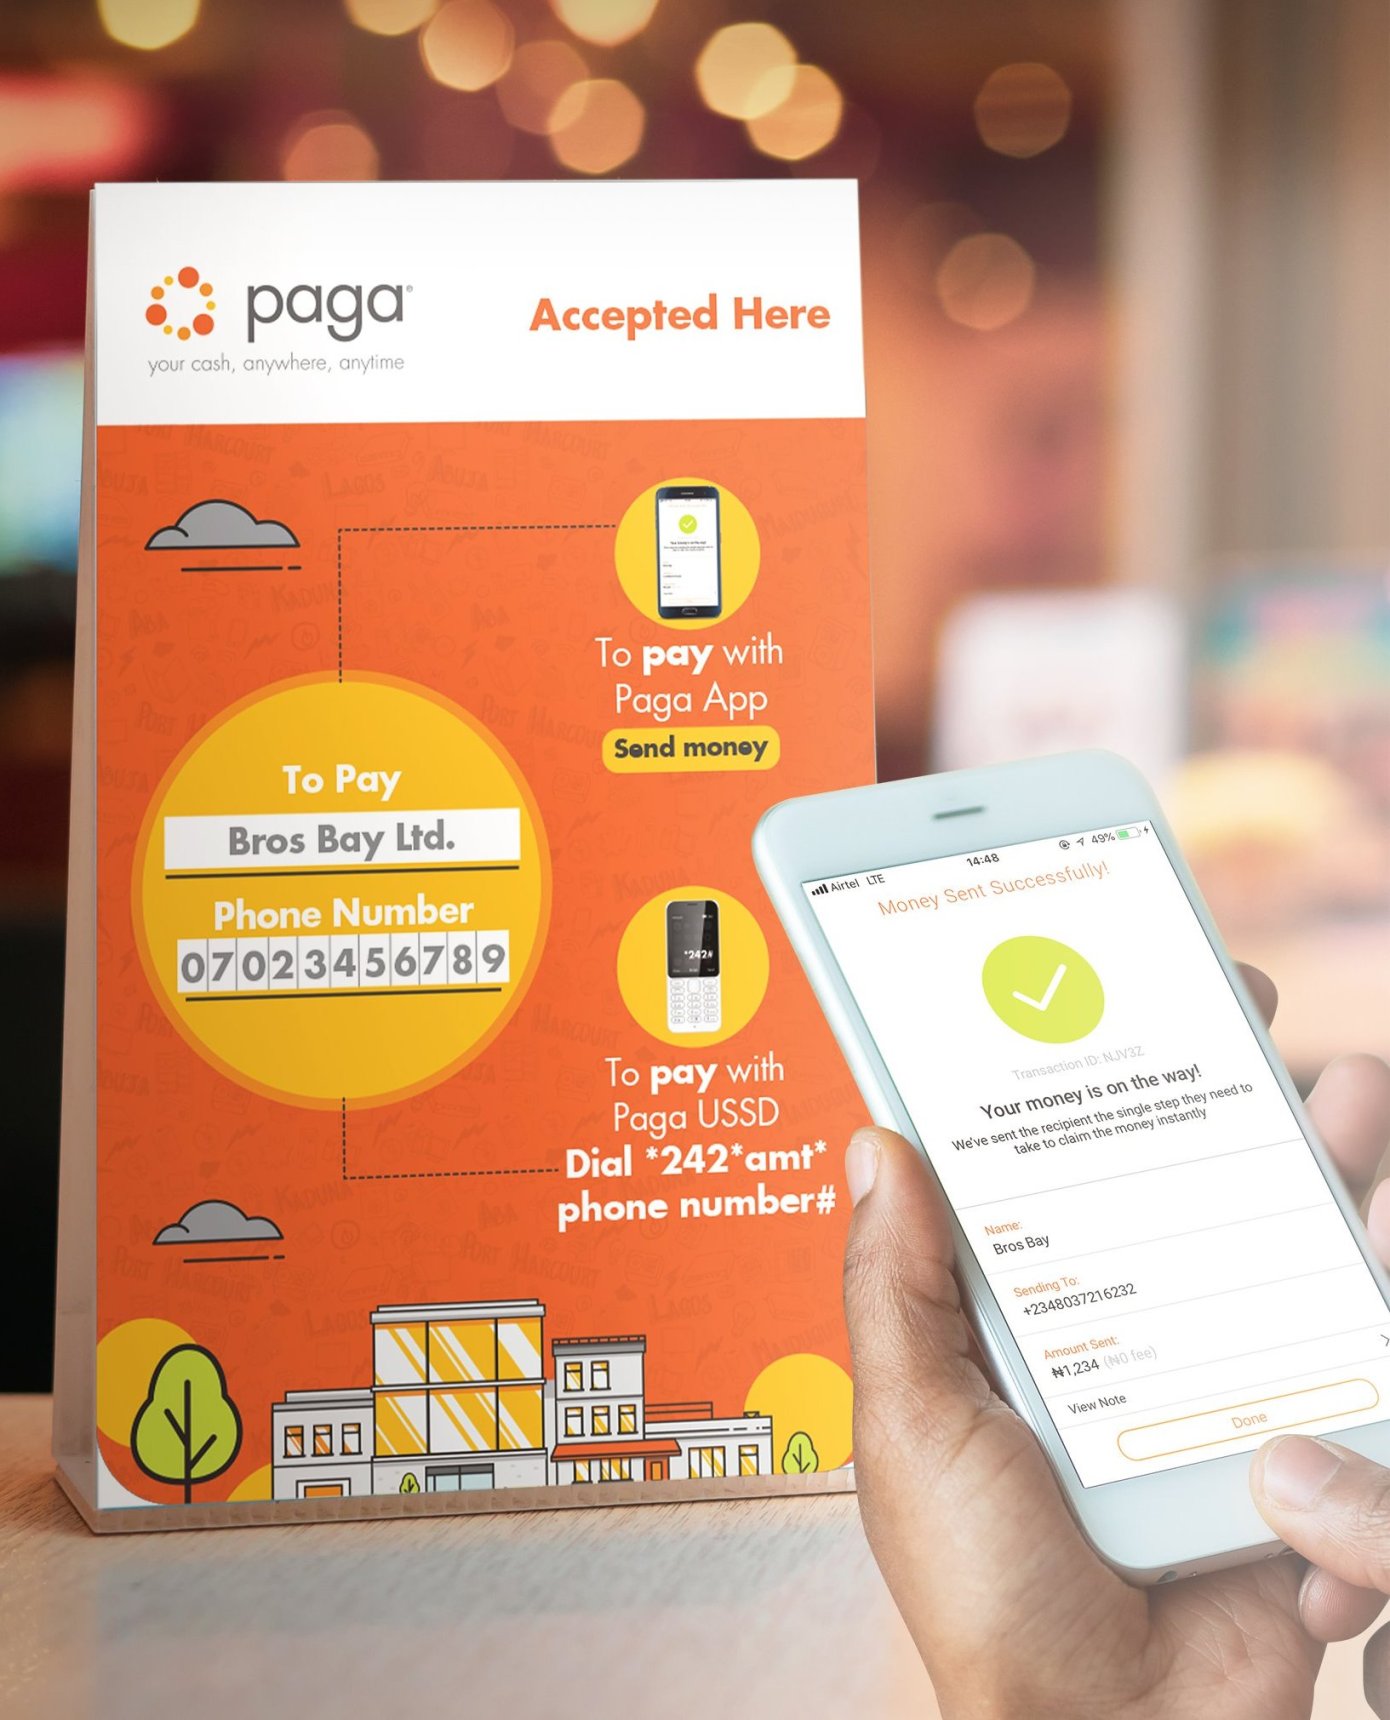 Paga: African startup teams up with Visa to provide fintech systems in Africa and beyond